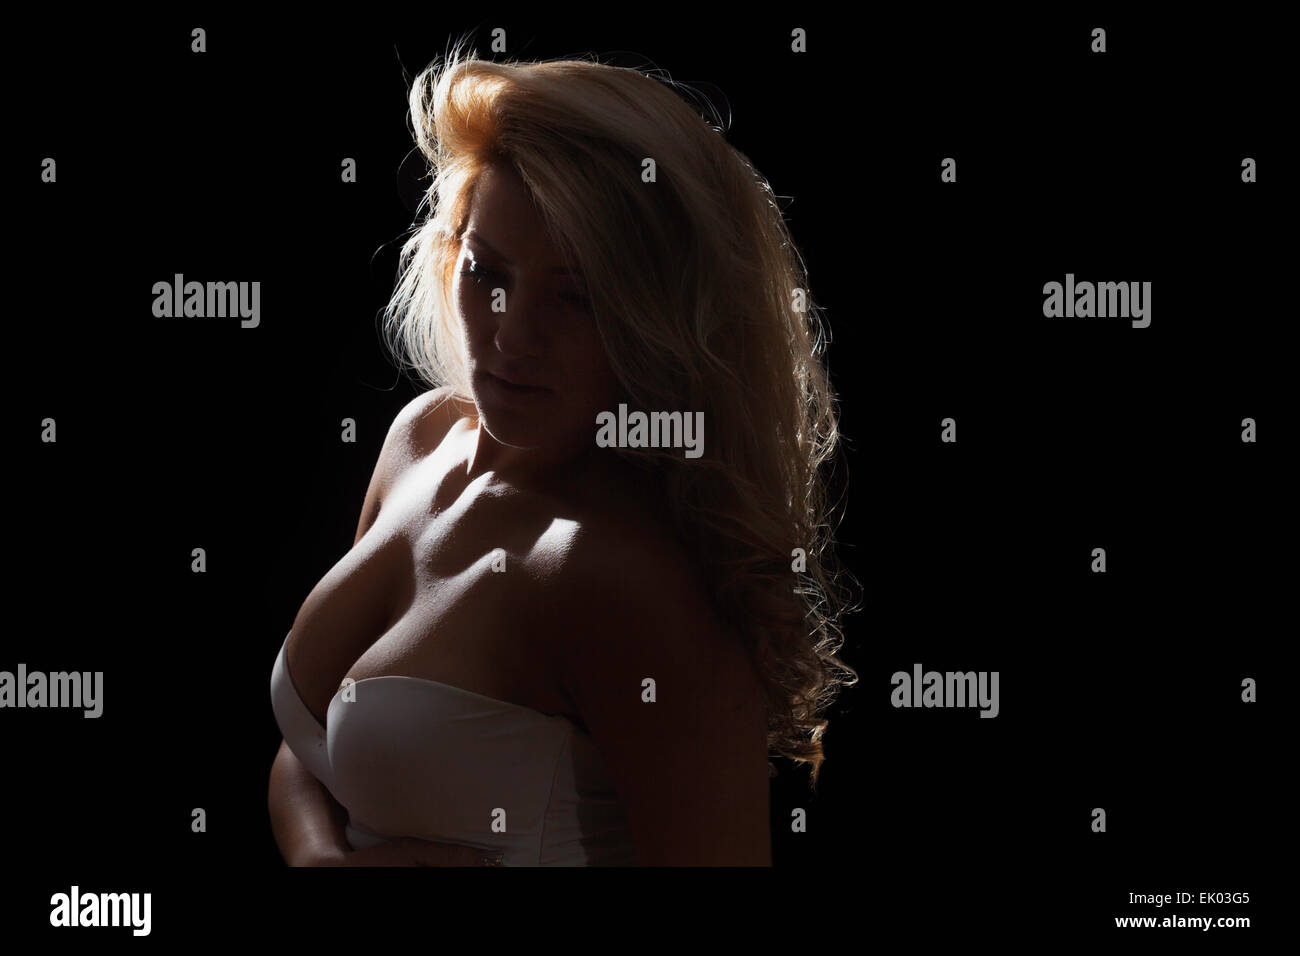 A blonde latina model isolated on black background. Dark and moody low-key. Stock Photo